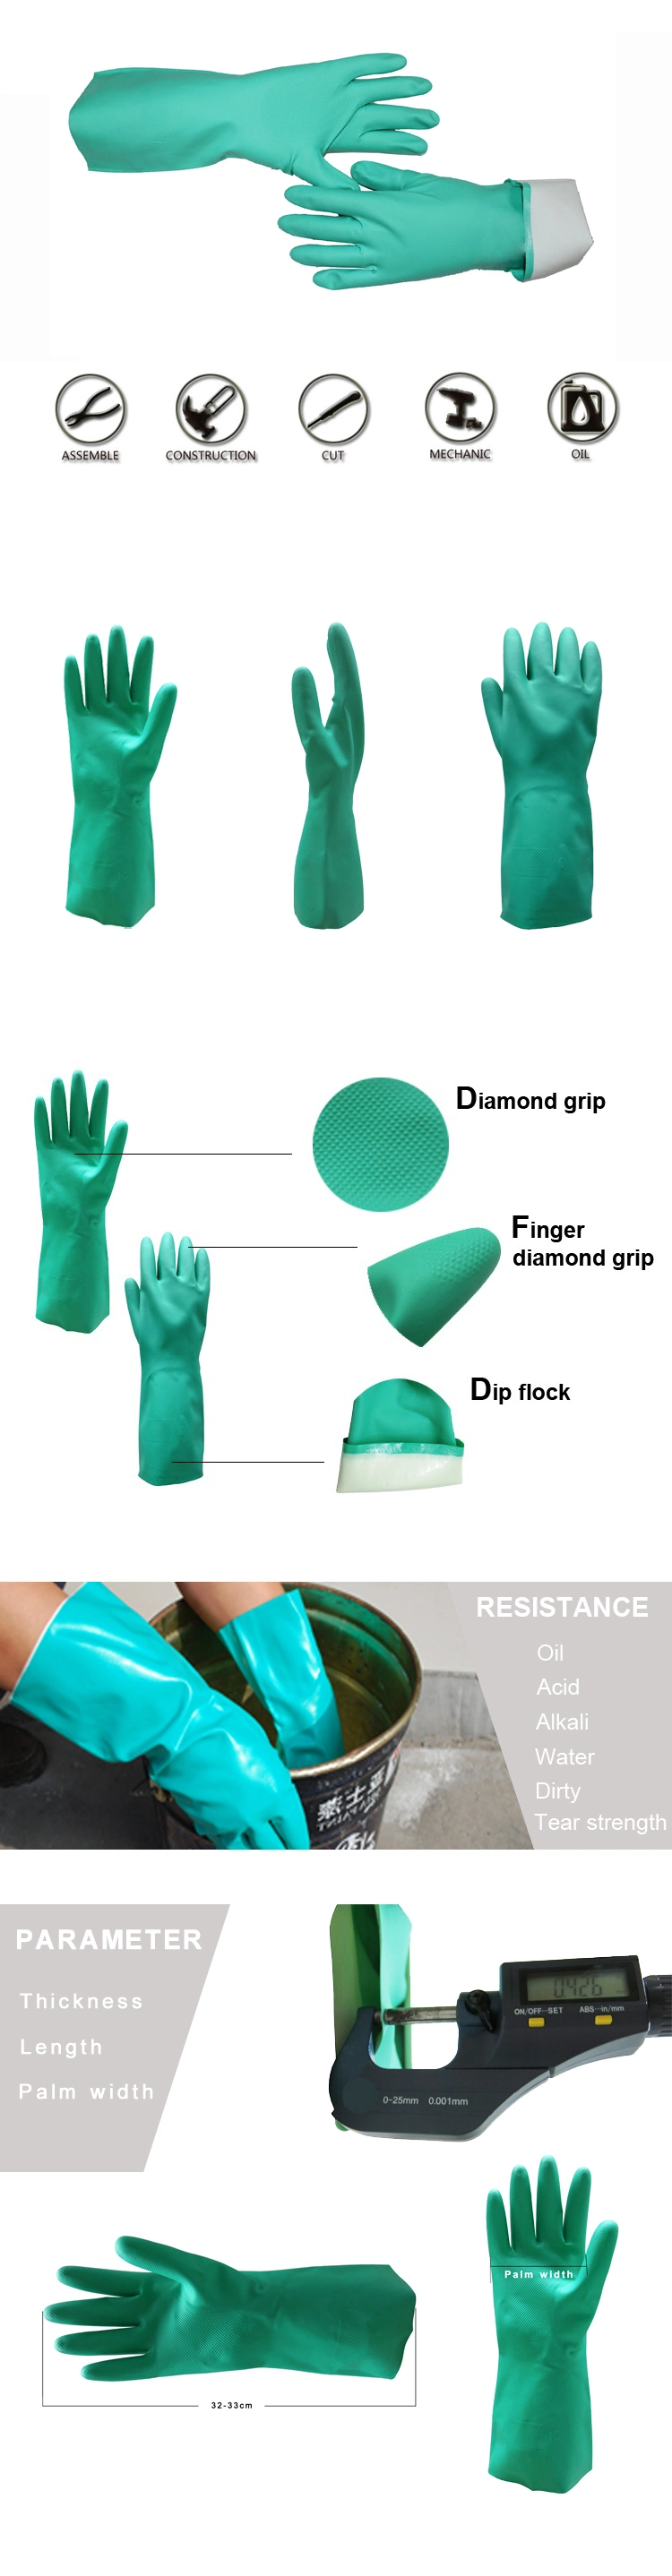 32cm Length Green Nitrile Gloves with White Dipped Flock for Chemical Resistance Purpose